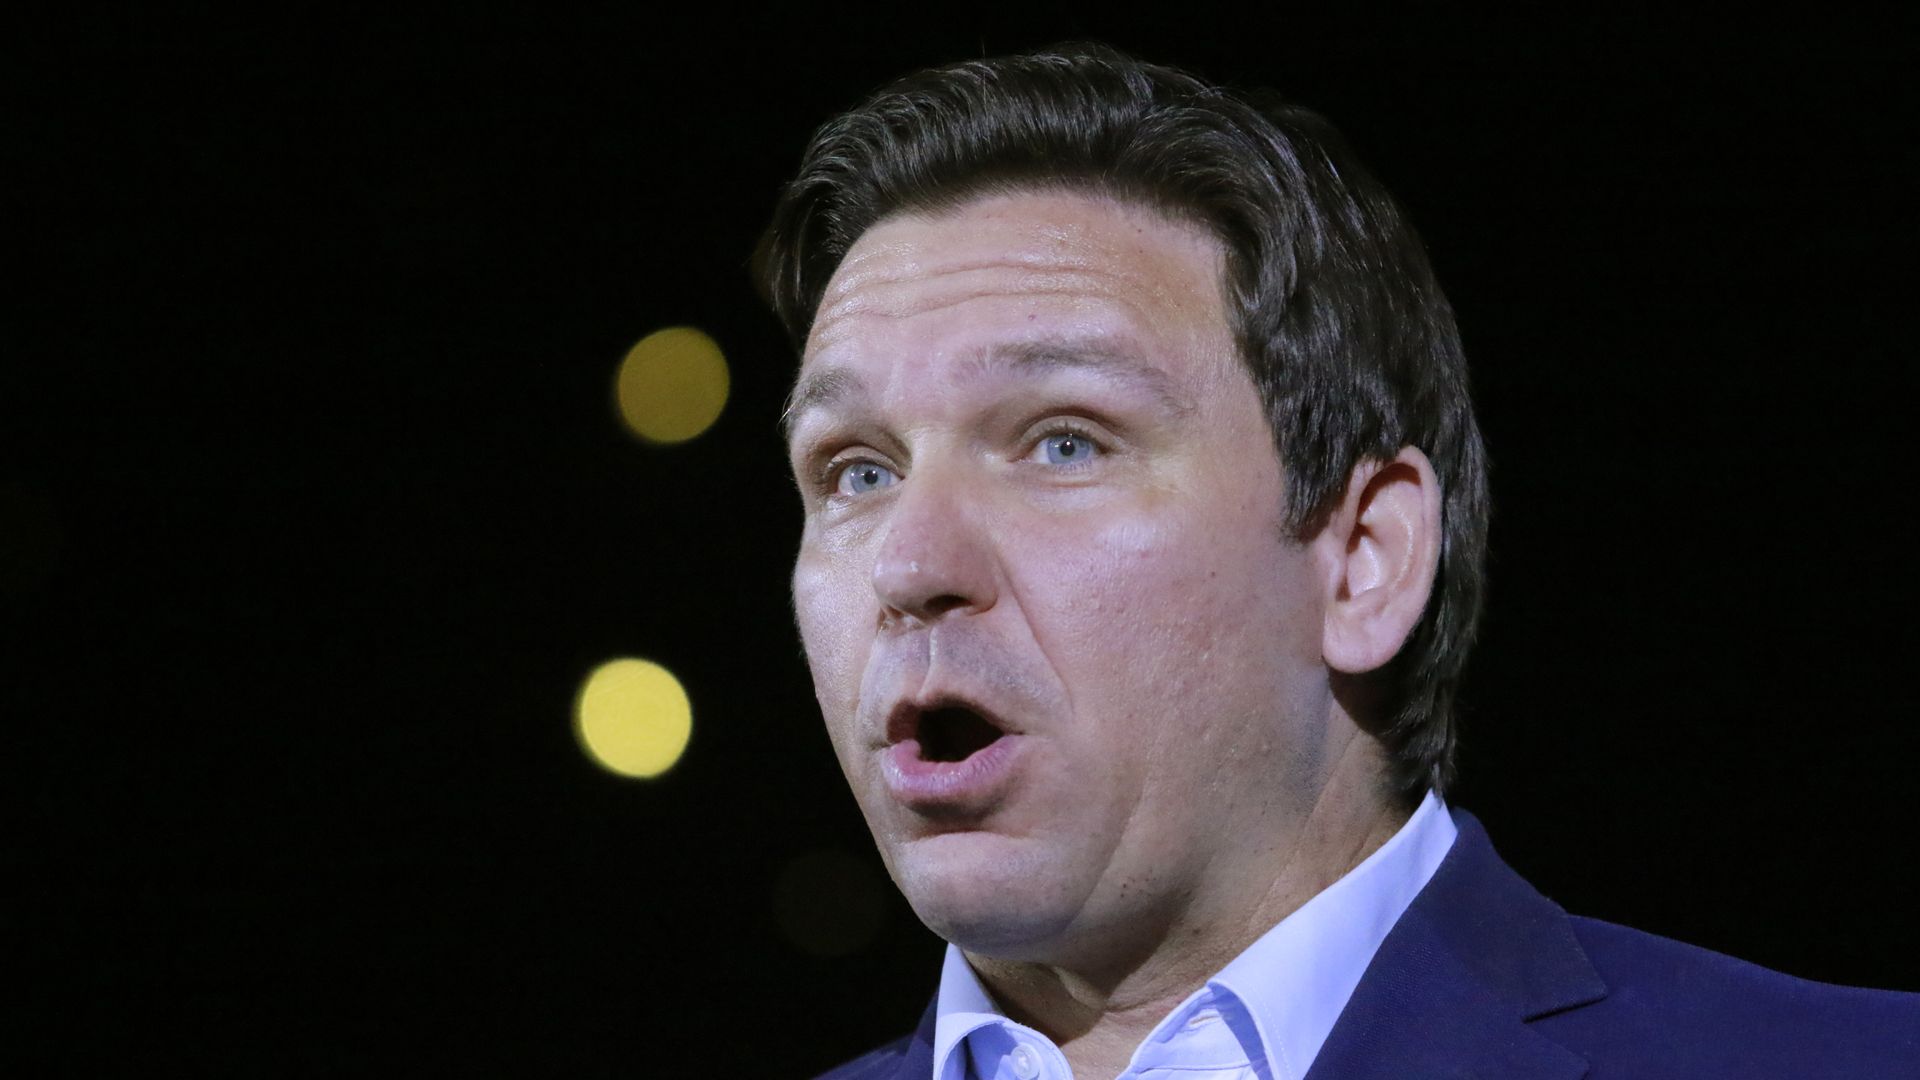 lorida Governor Ron DeSantis speaks during a campaign event for Republican Senate candidate from Nevada Adam Laxalt (not pictured) at Stoneys Rockin Country on April 27, 2022 in Las Vegas, Nevada